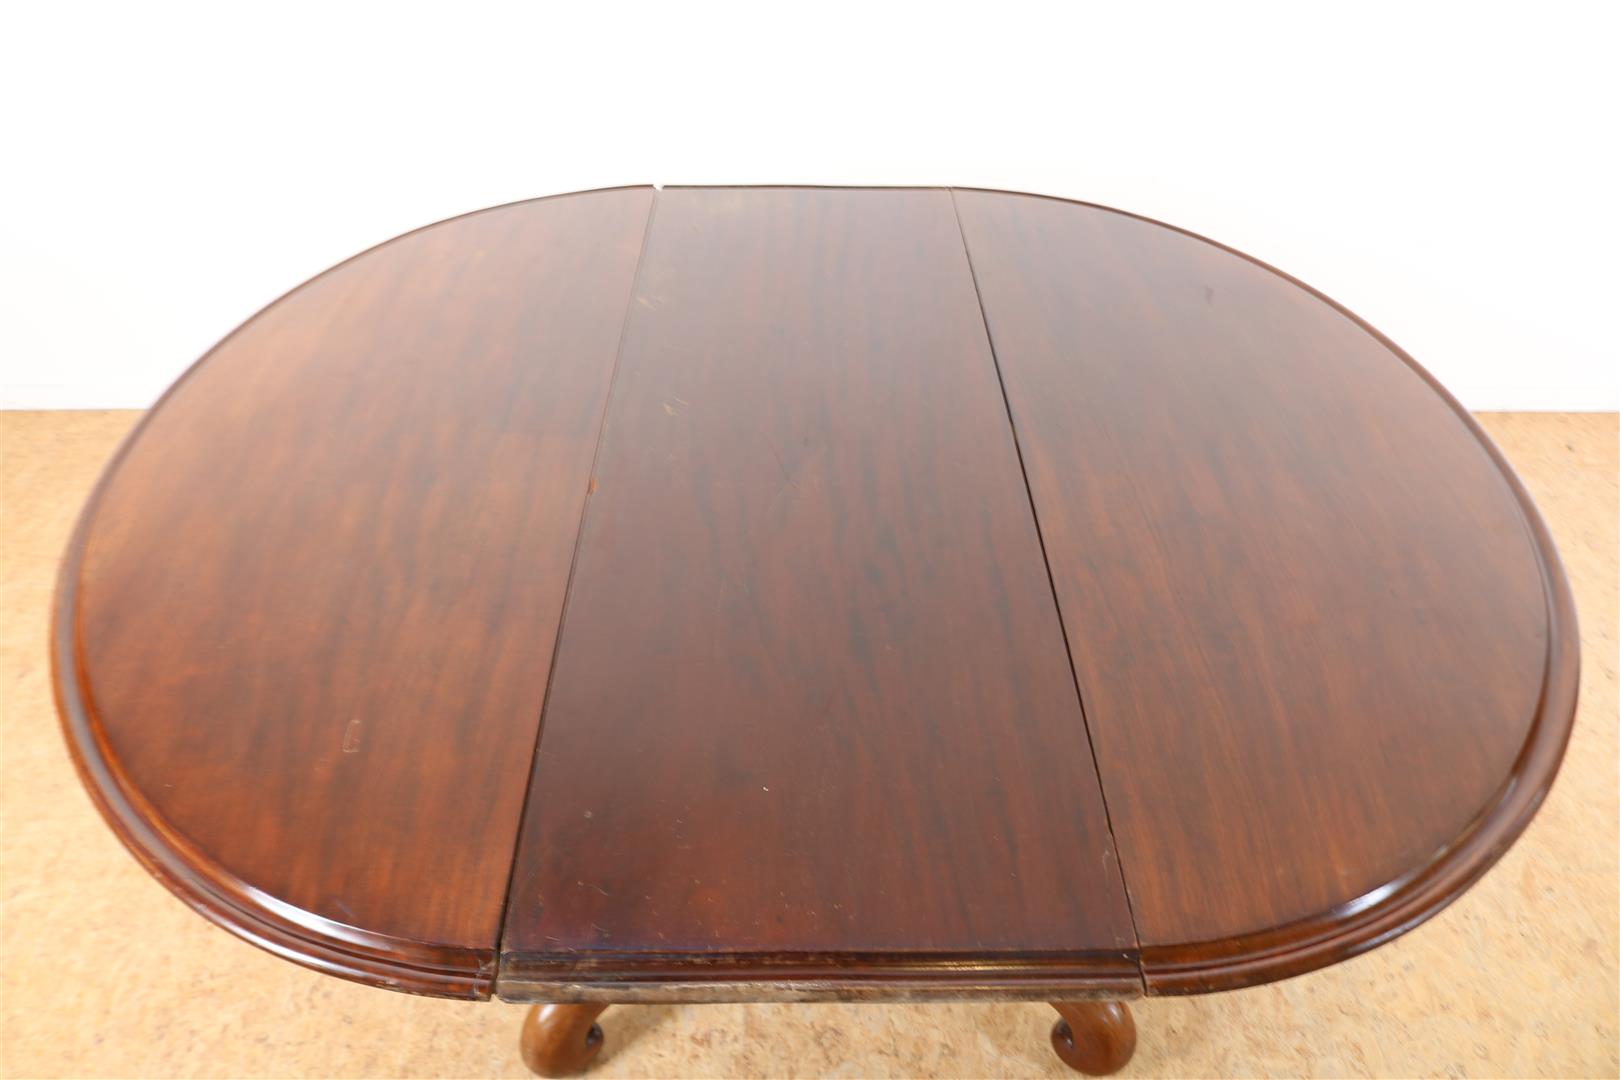 Mahogany Biedermeier coulisse table on spider head leg, 19 century, 74 x 135 x 108 cm, with - Image 6 of 7